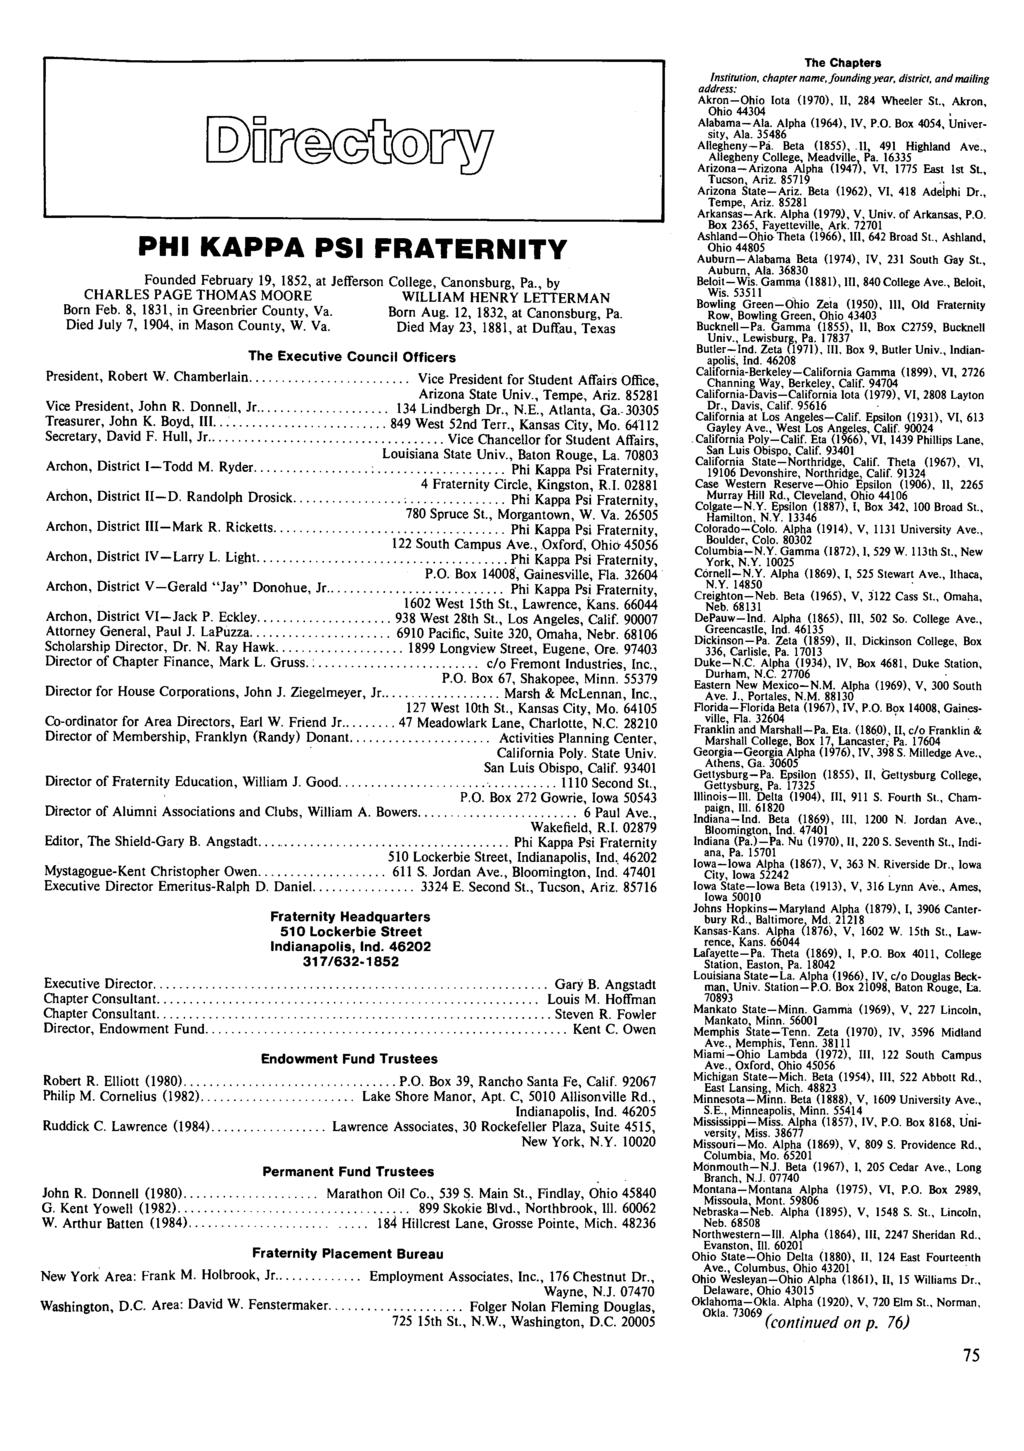 PHI KAPPA PSI FRATERNITY Founded February 19, 1852, at Jefferson College, Canonsburg, Pa., by CHARLES PAGE THOMAS MOORE WILLIAM HENRY LETTERMAN Born Feb. 8, 1831, in Greenbrier County, Va. Born Aug.